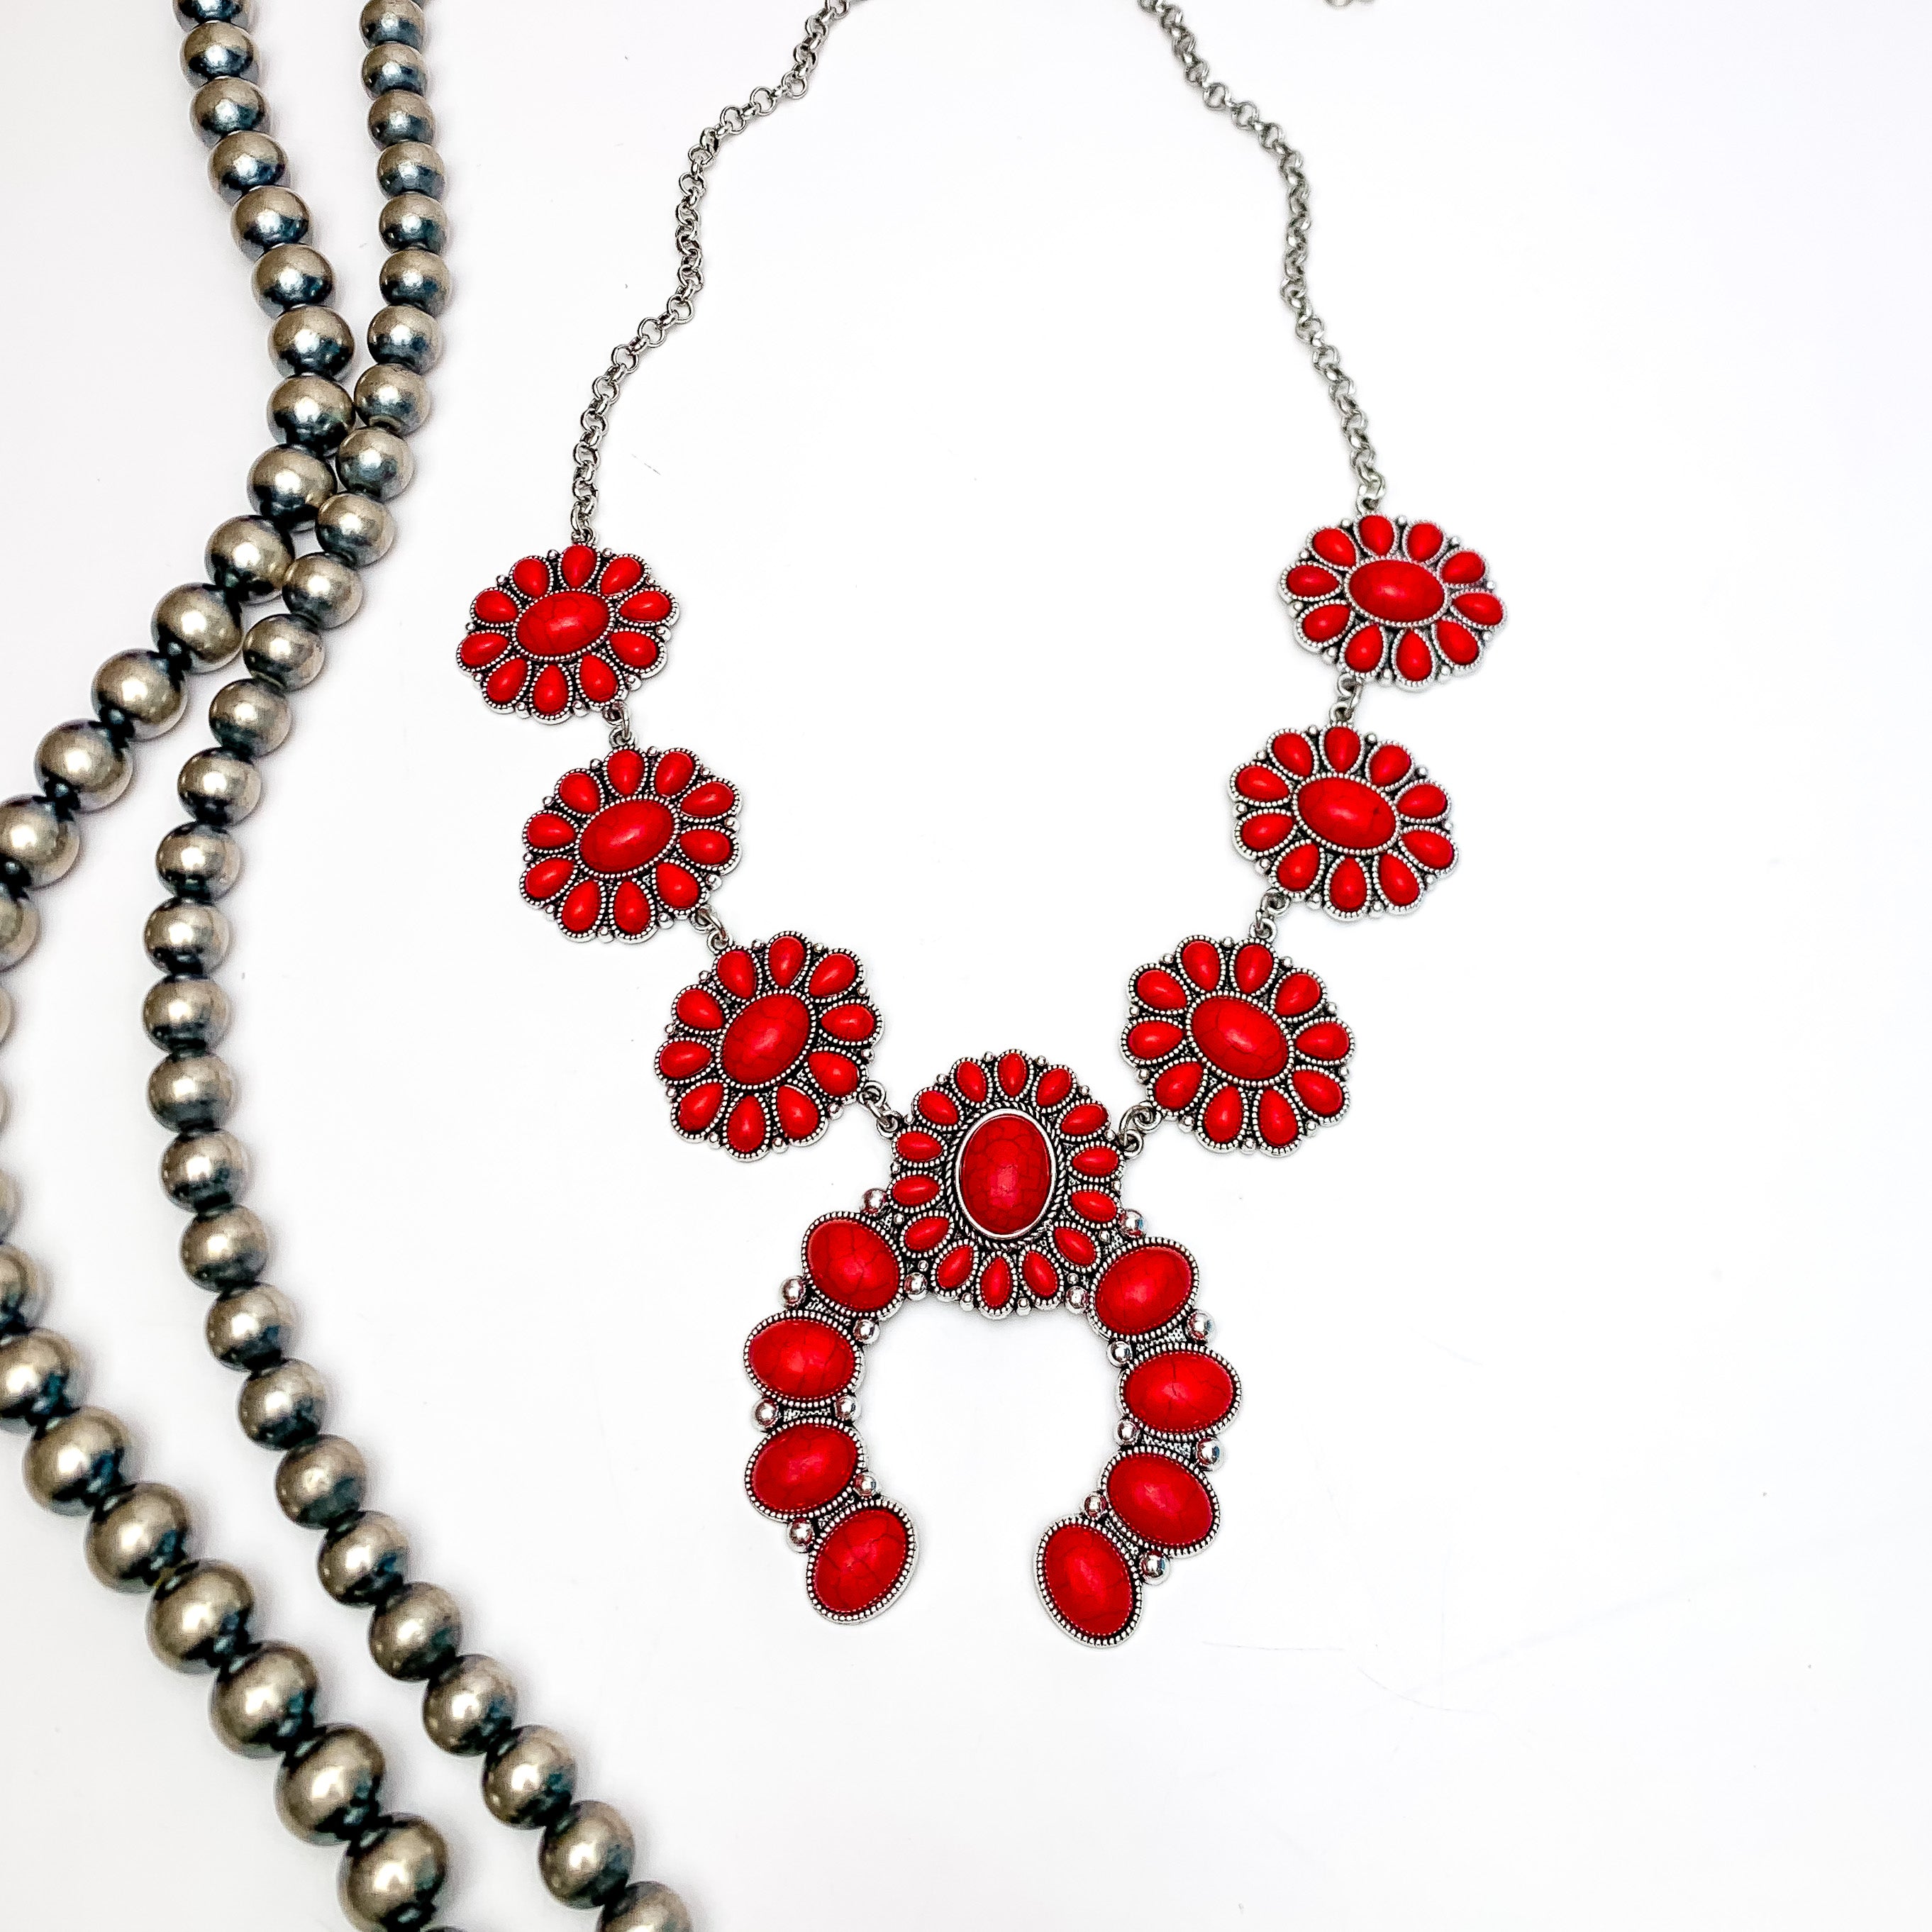 The Western Way Squash Blossom Necklace in Red. Pictured on a white background with Navajo beads on the left.